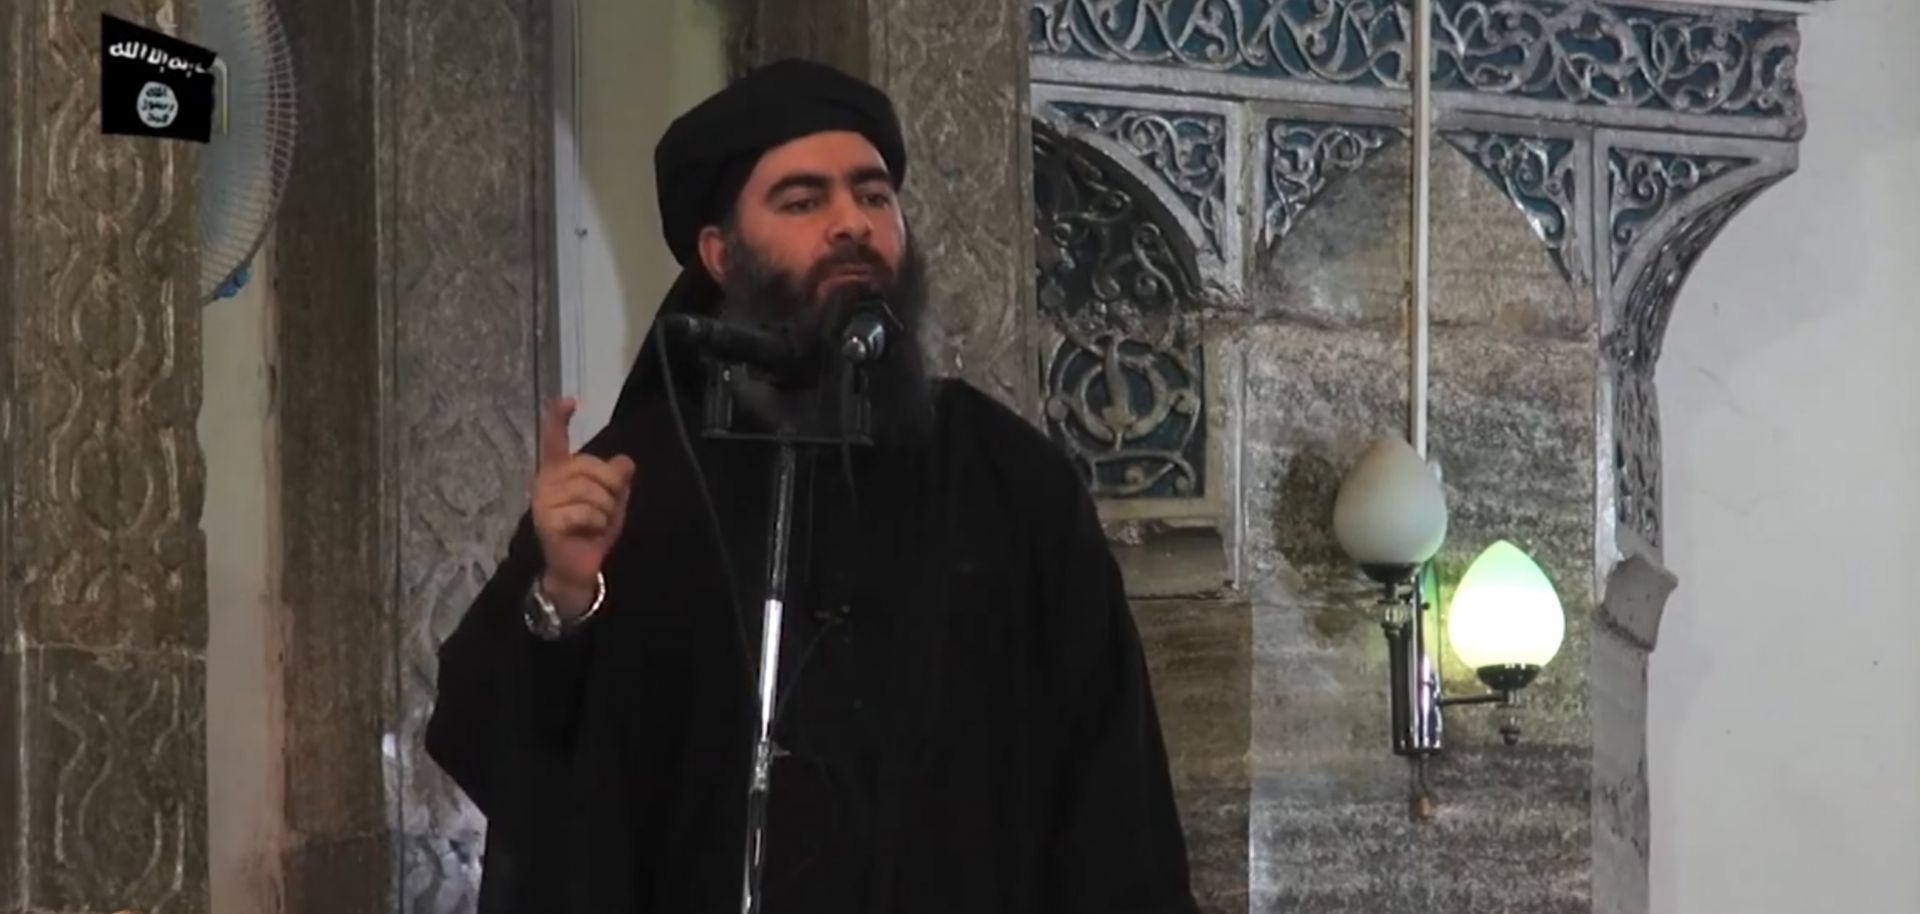 This July 5, 2014, photo shows an image grab taken from a propaganda video released by al-Furqan Media showing Islamic State leader Abu Bakr al-Baghdadi as he declares himself caliph in Mosul.